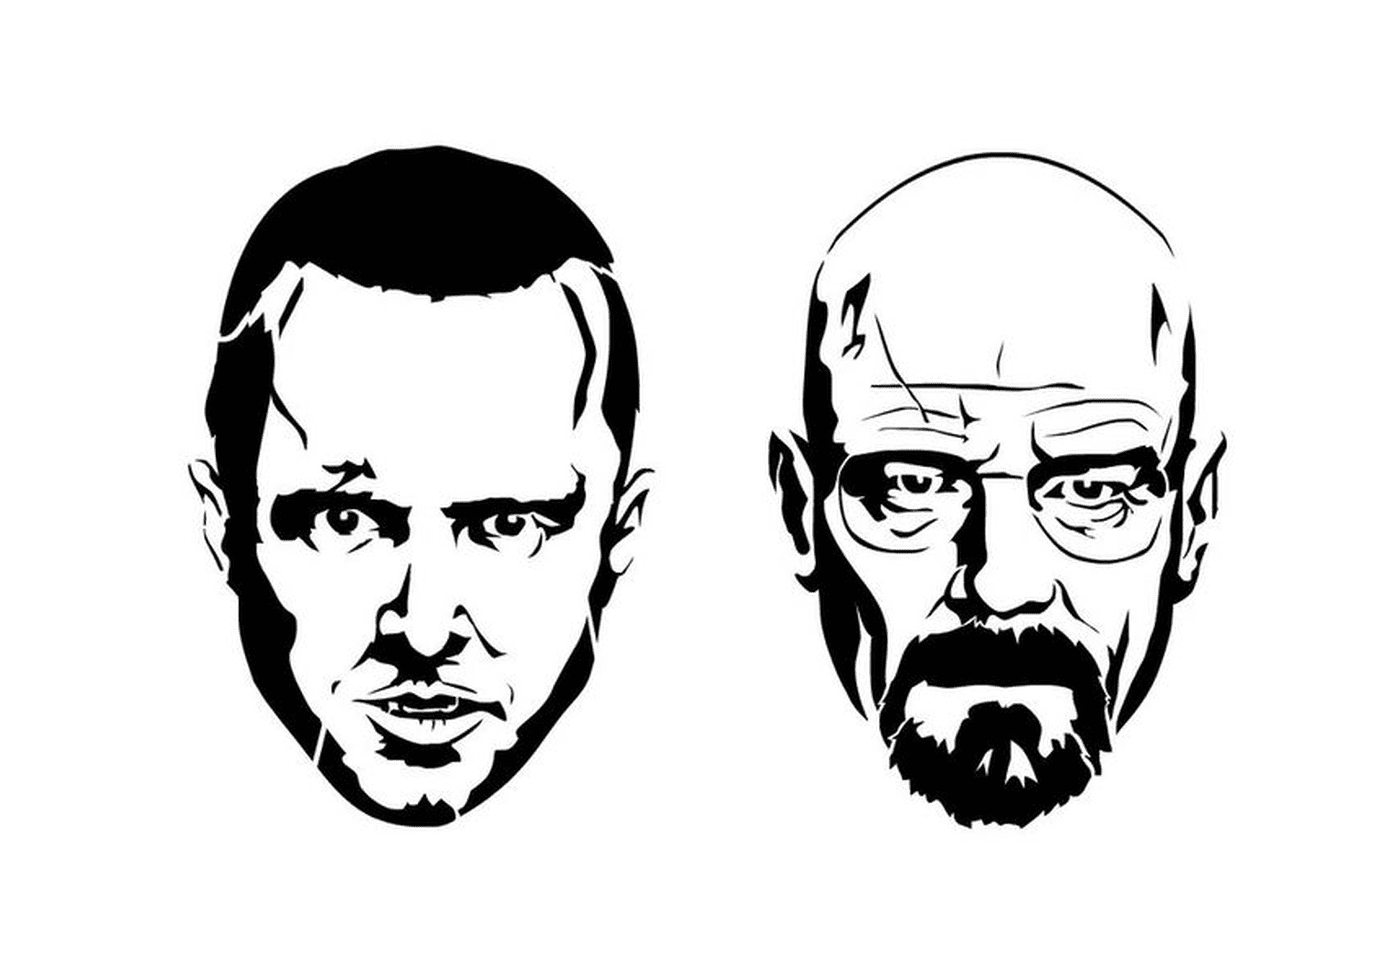  Two black and white images of Walter White and Jesse Pinkman from Breaking Bad 